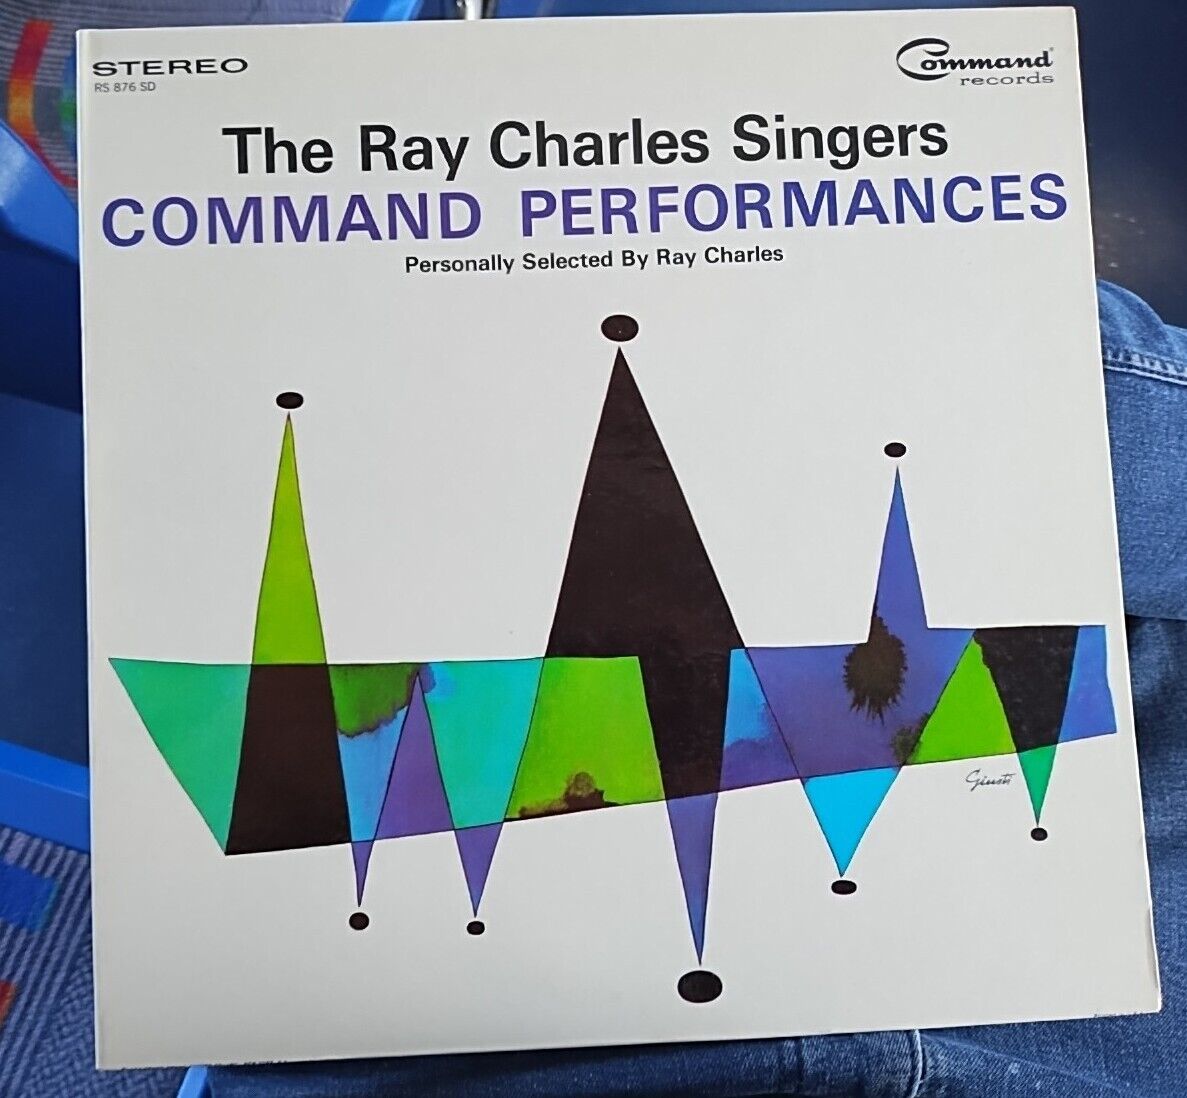 The Ray Charles Singers–Command Performances Command–RS 876 SD, Stereo Gatefold